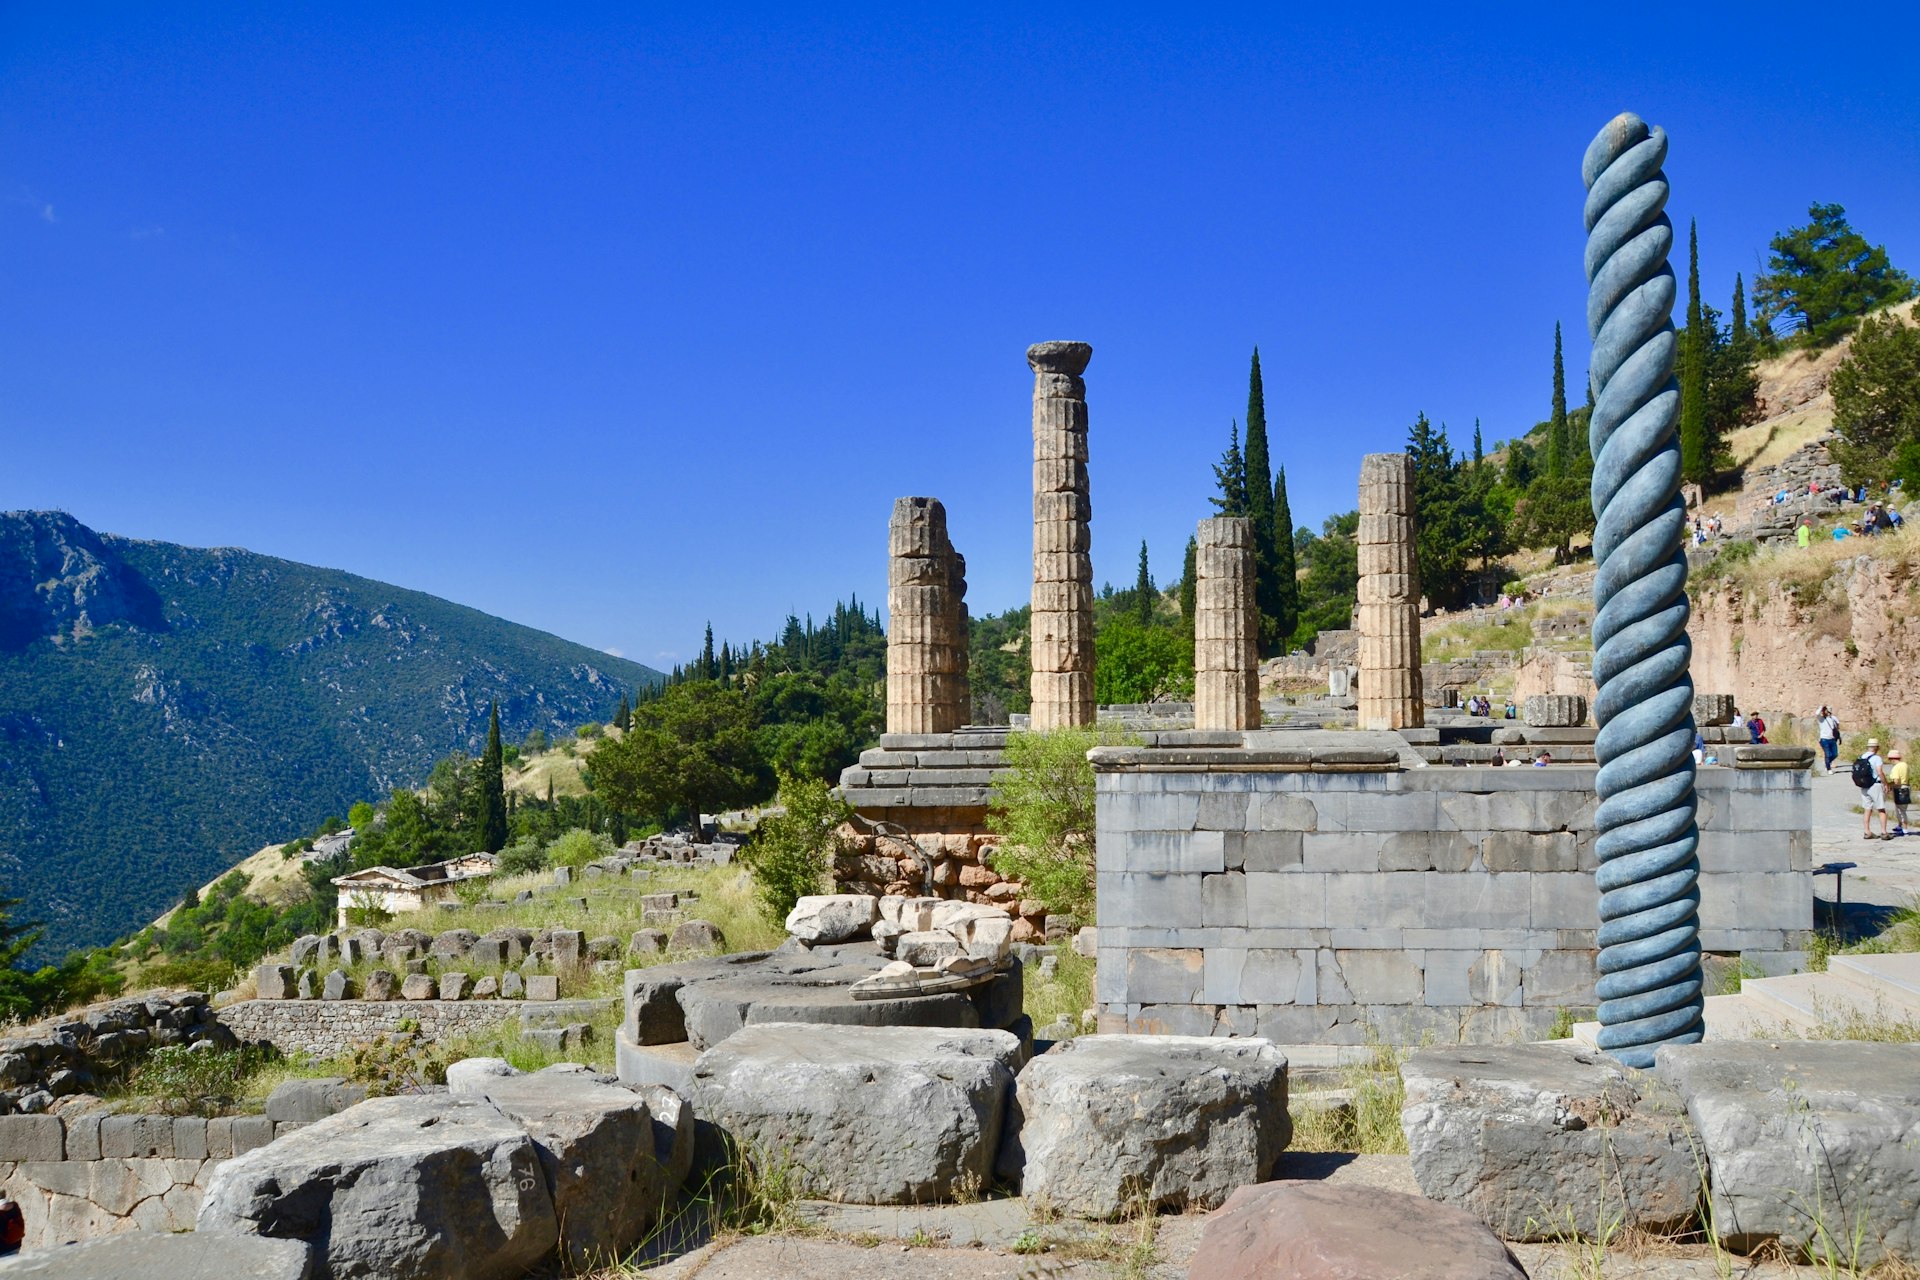 The twisted serpent column and the Doric columns of the Temple of Apollo.